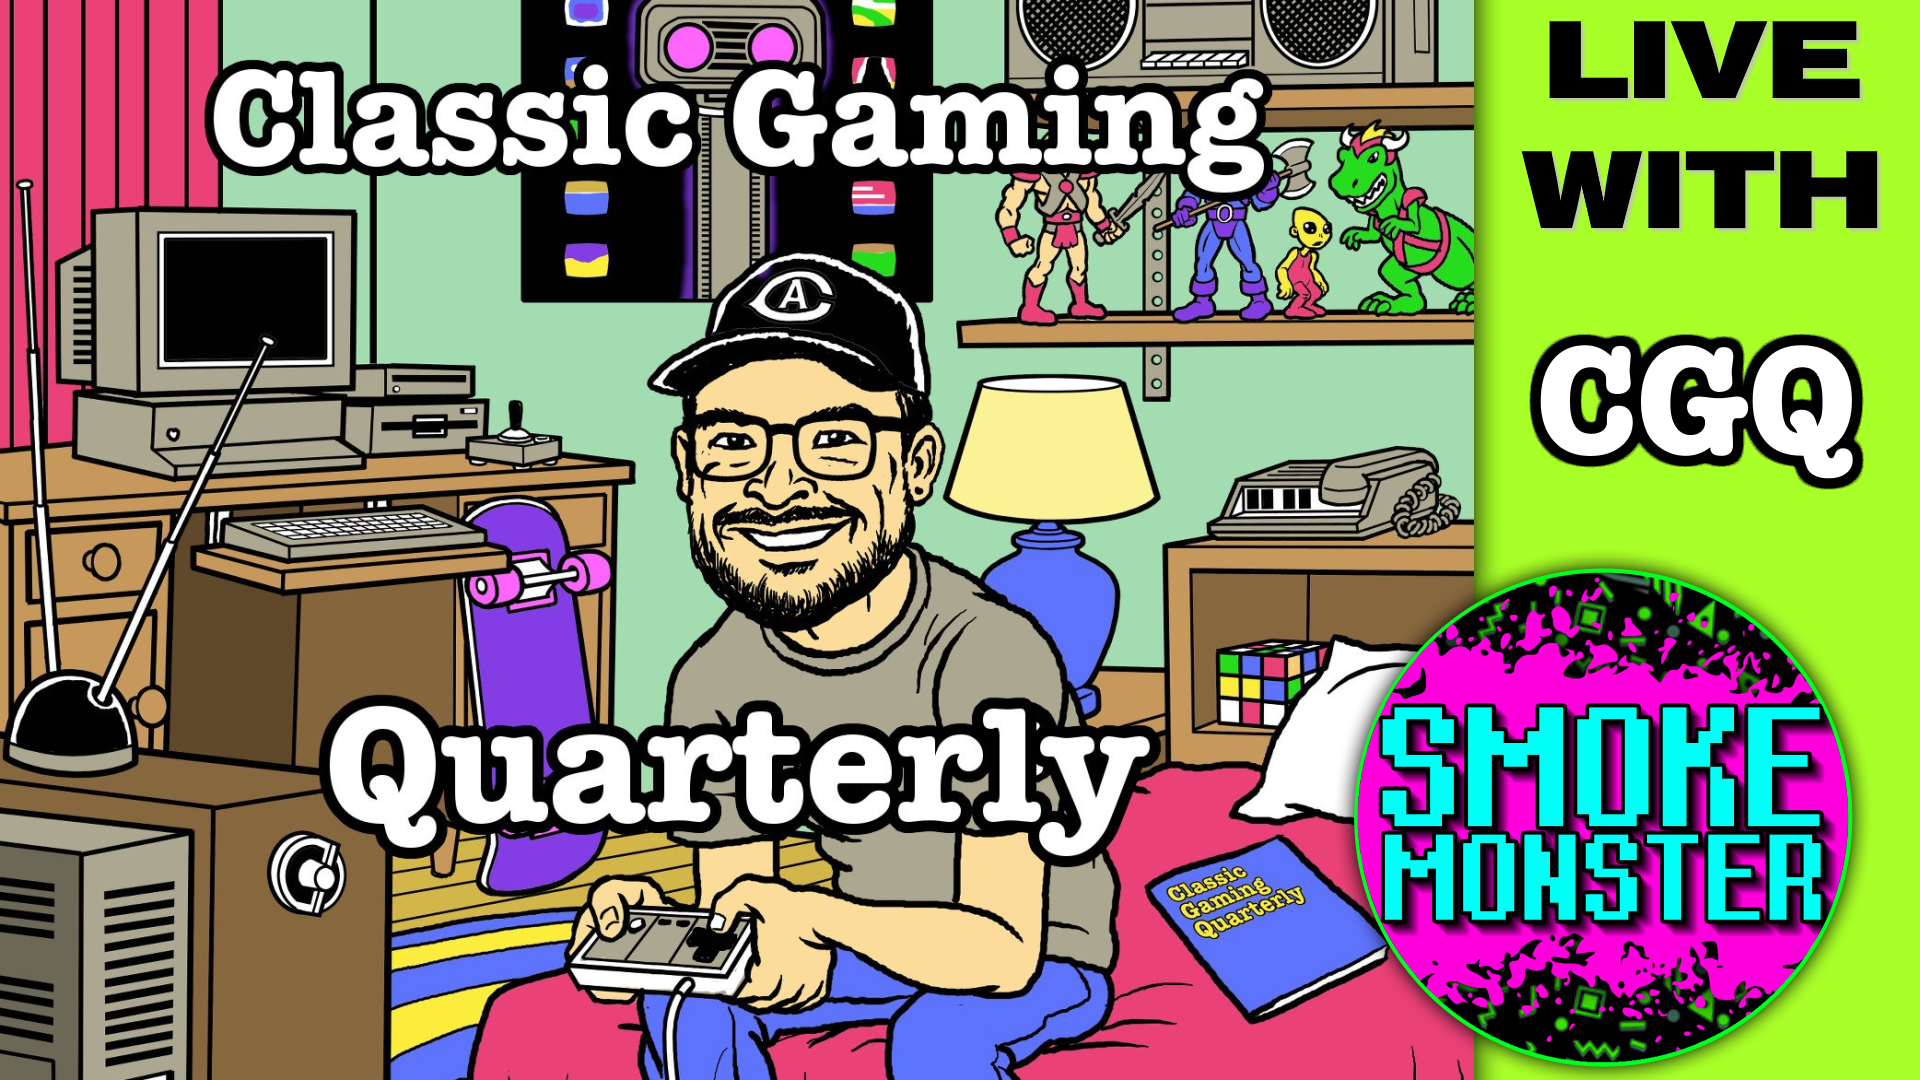 The Sega Genesis in 1990 by Classic Gaming Quarterly and SmokeMonster CGQ interview